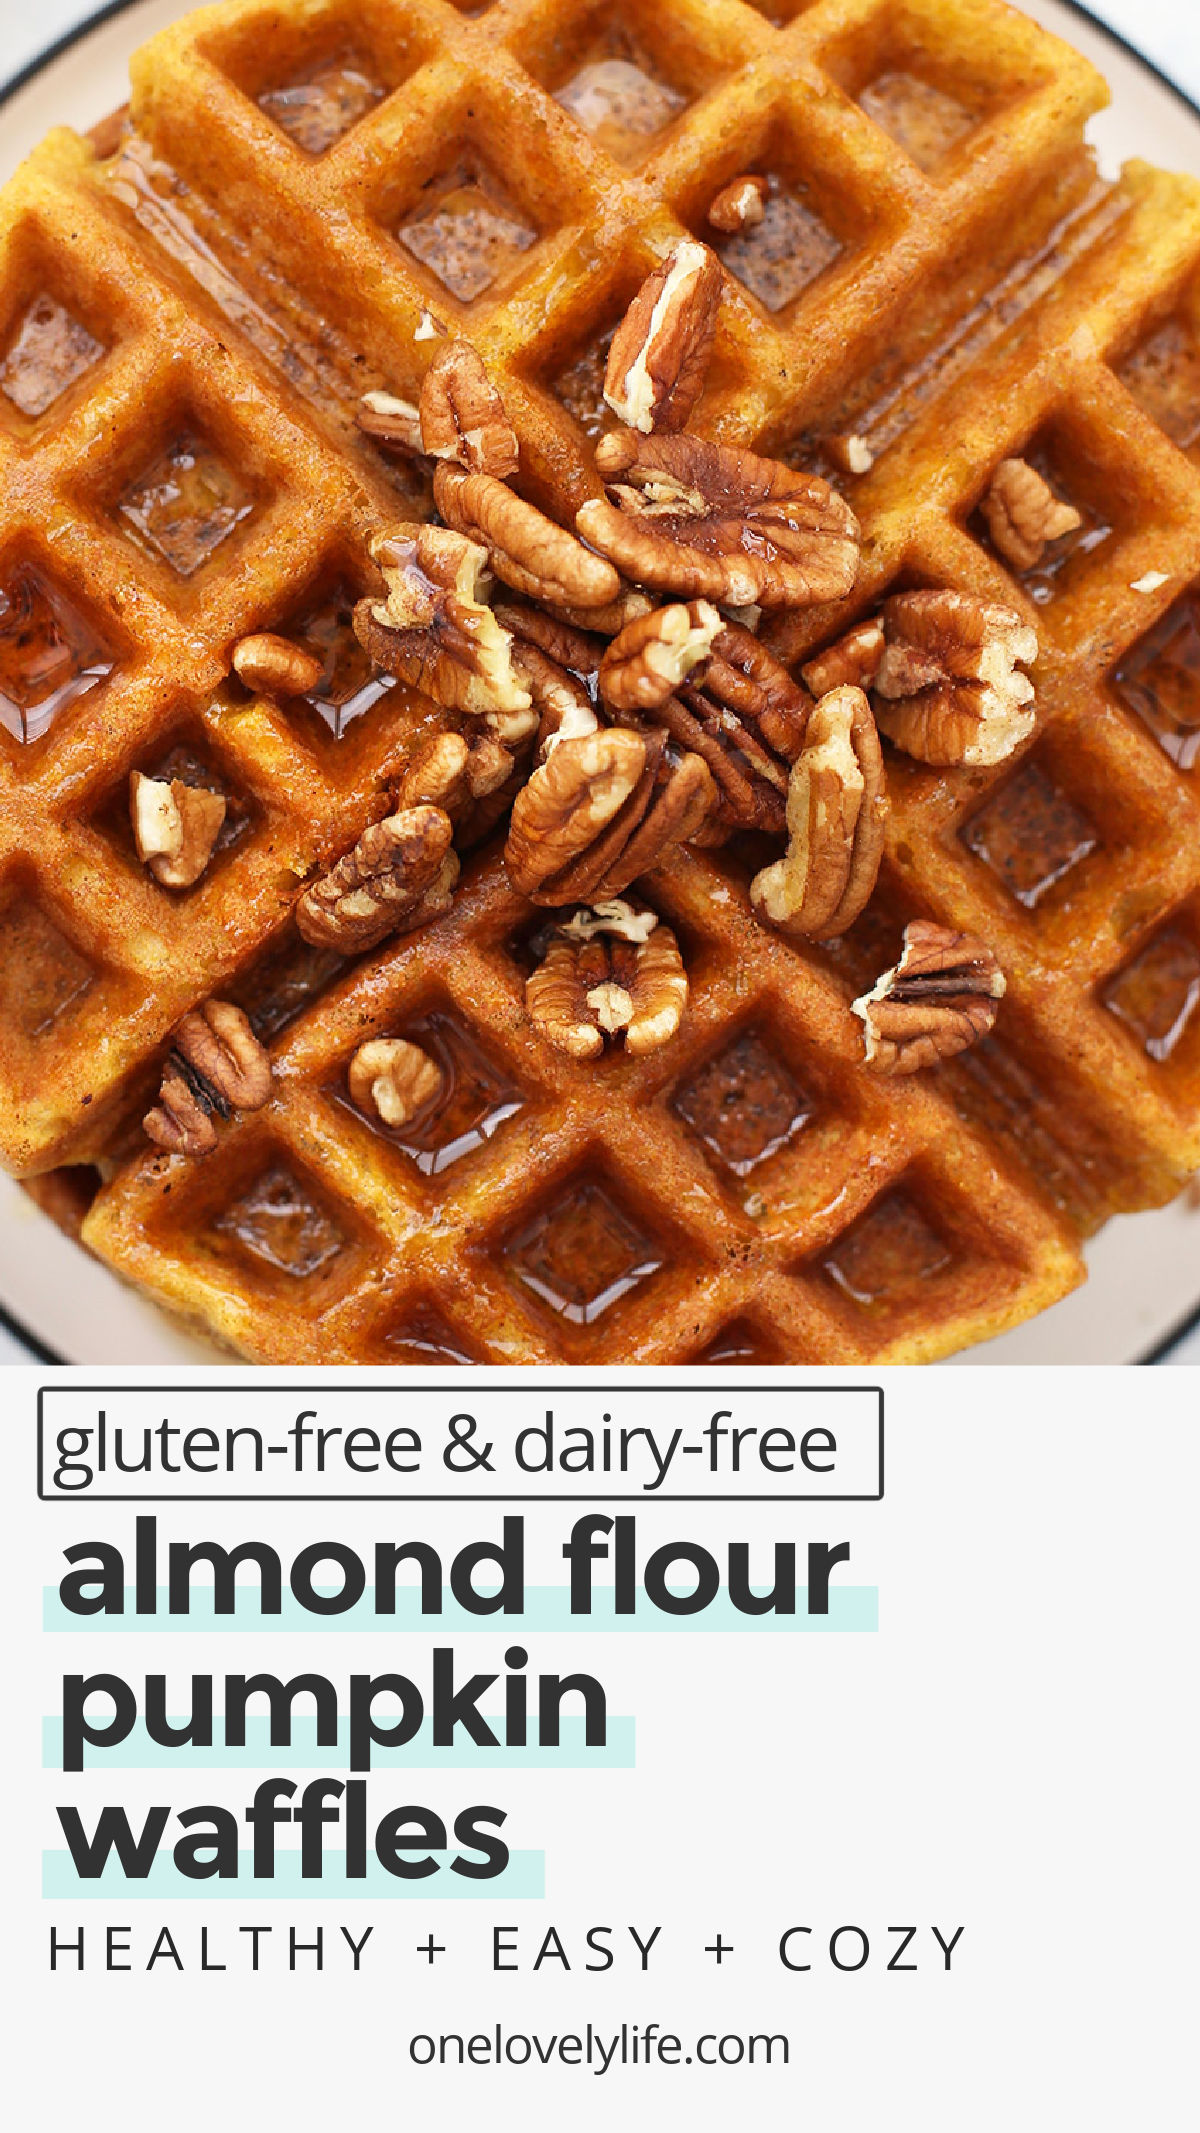 Almond Flour Pumpkin Waffles - These paleo pumpkin waffles are naturally gluten free, and completely delicious. Crispy on the outside and fluffy on the inside. // Paleo waffle recipe // almond flour waffle recipe // gluten free pumpkin waffle recipe // gluten free pumpkin waffles recipe // paleo pumpkin waffles recipe // almond flour waffles recipe // pumpkin waffles recipe // paleo breakfast // paleo pumpkin recipes // gluten free breakfast // healthy pumpkin waffles